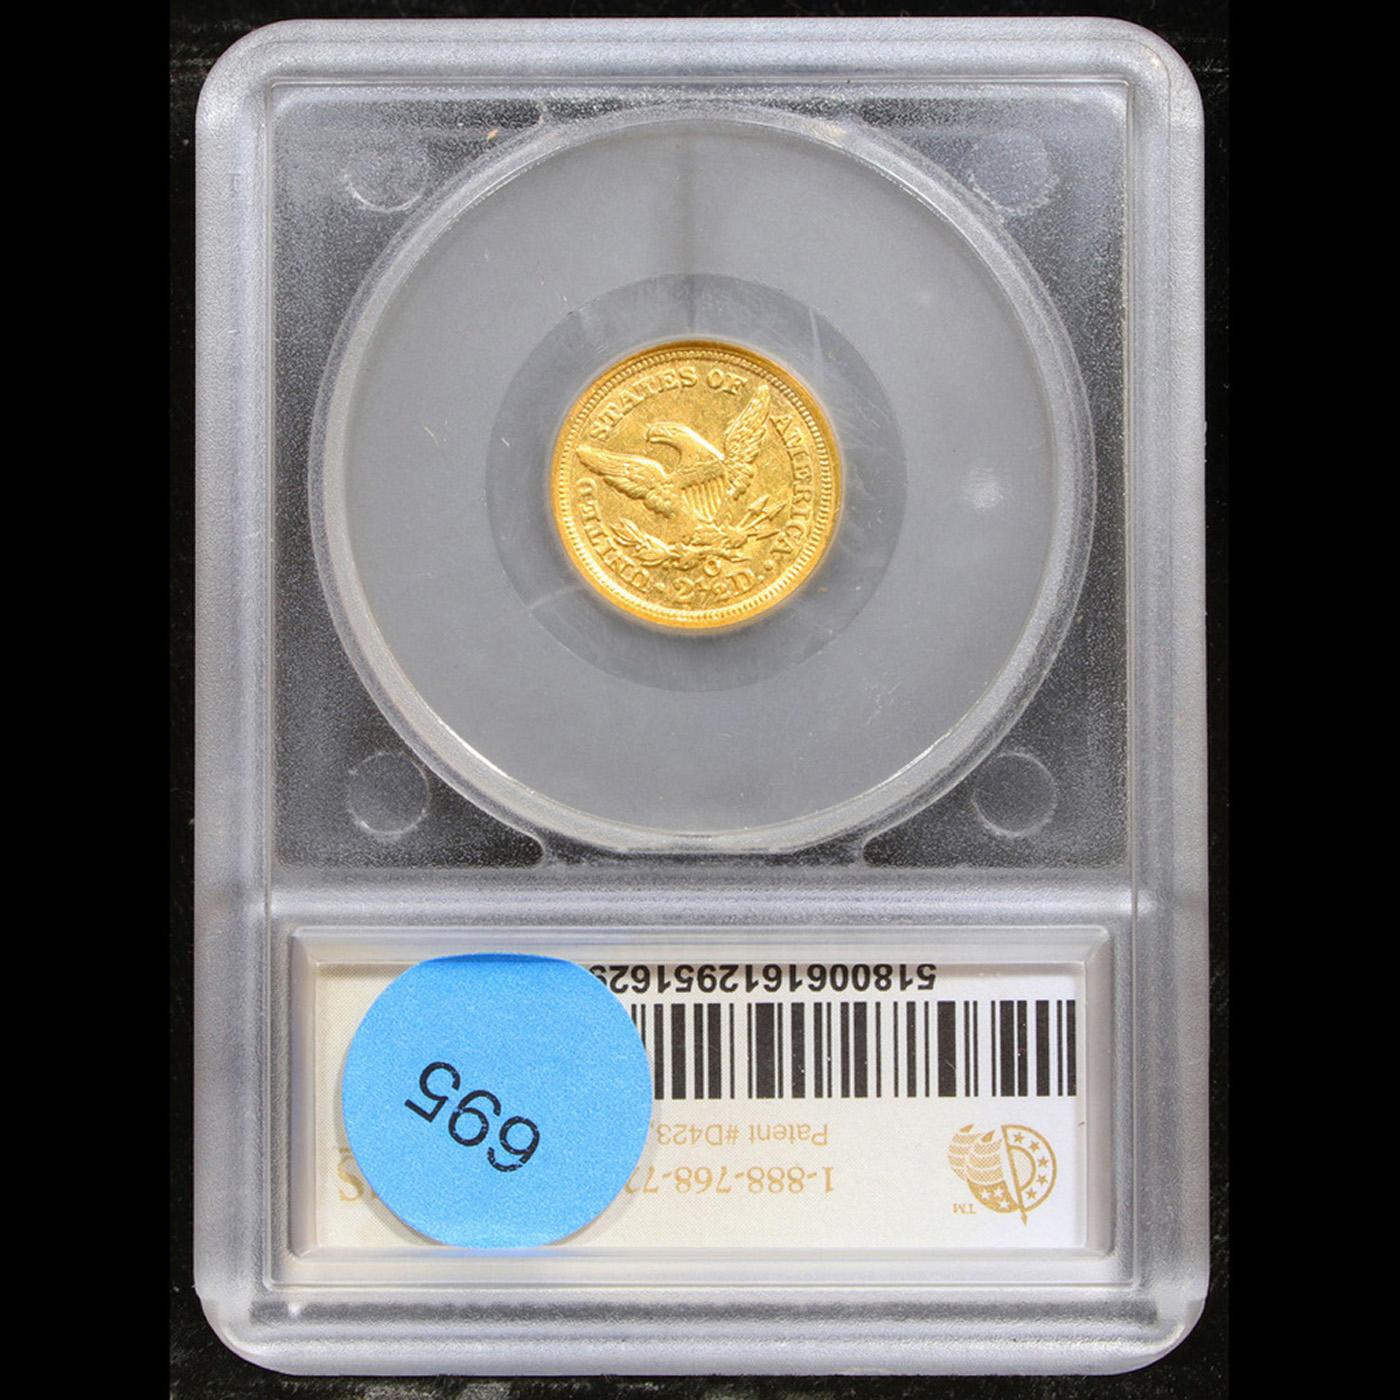 ***Auction Highlight*** 1847-o Gold Liberty Quarter Eagle $2 1/2 Graded ms63 By SEGS (fc)